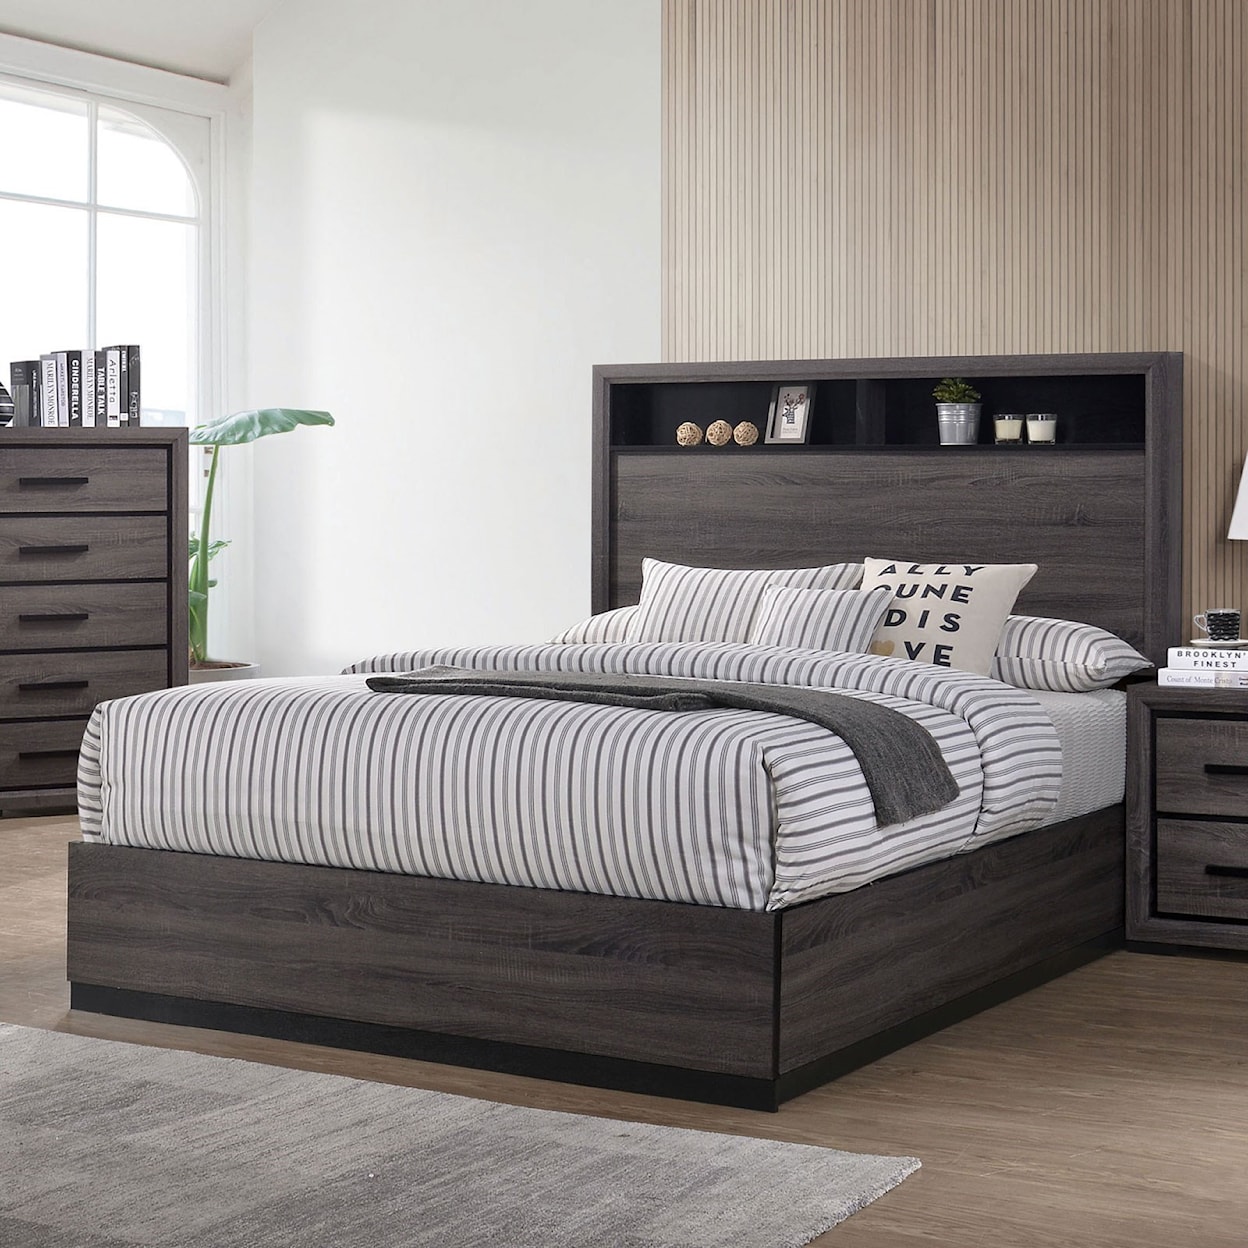 FUSA Conwy King Bed